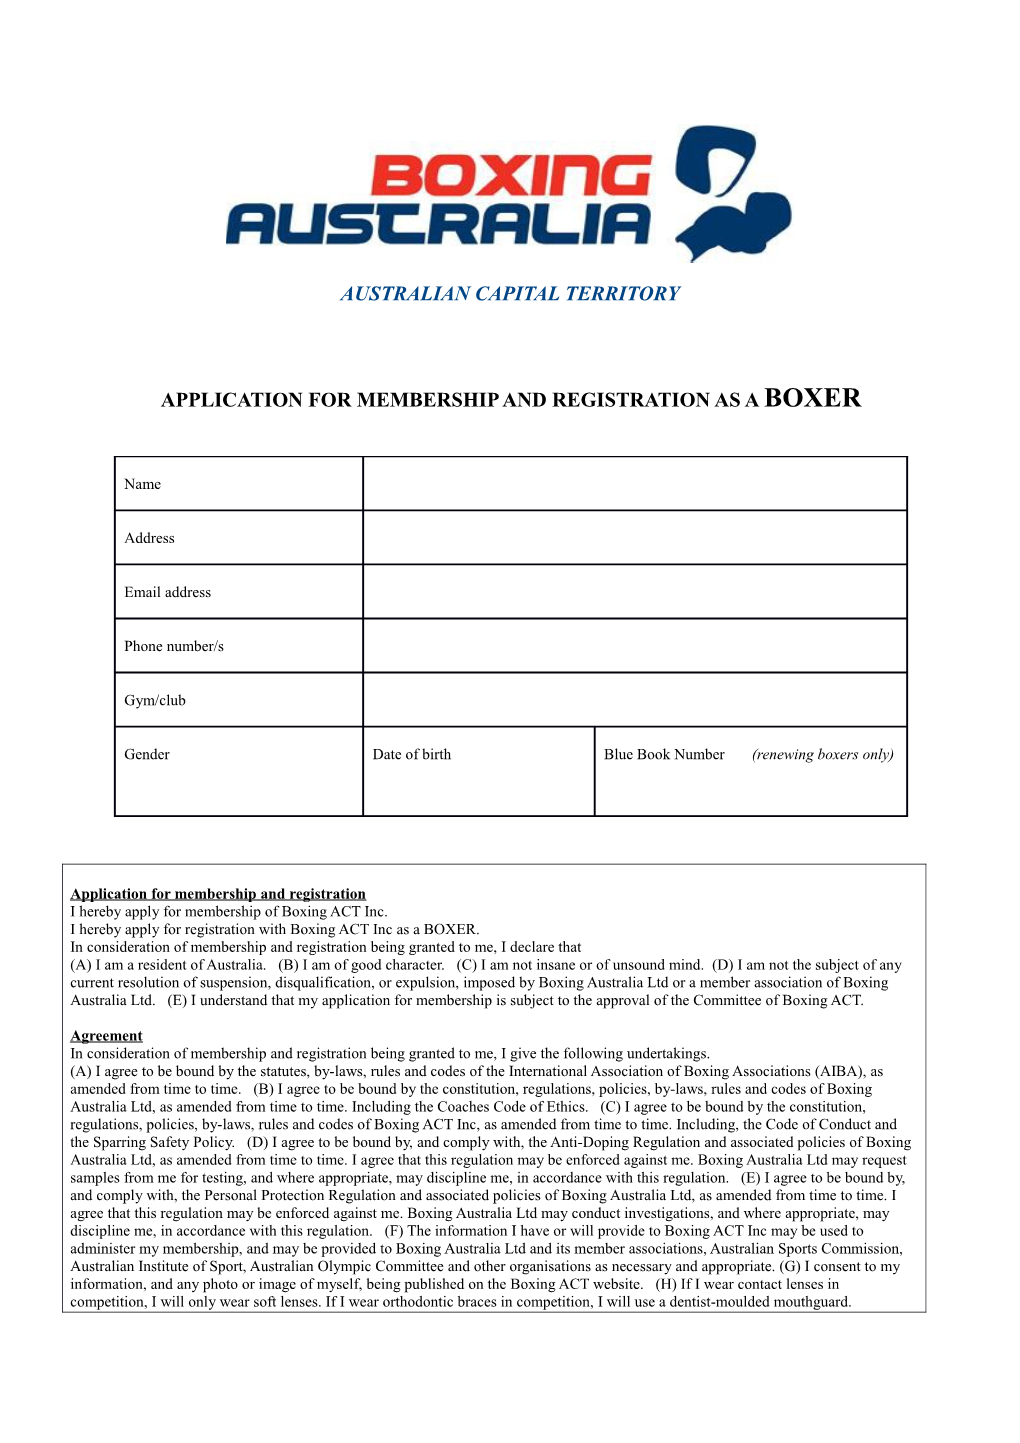 Application for Membership and Registration As a Boxer